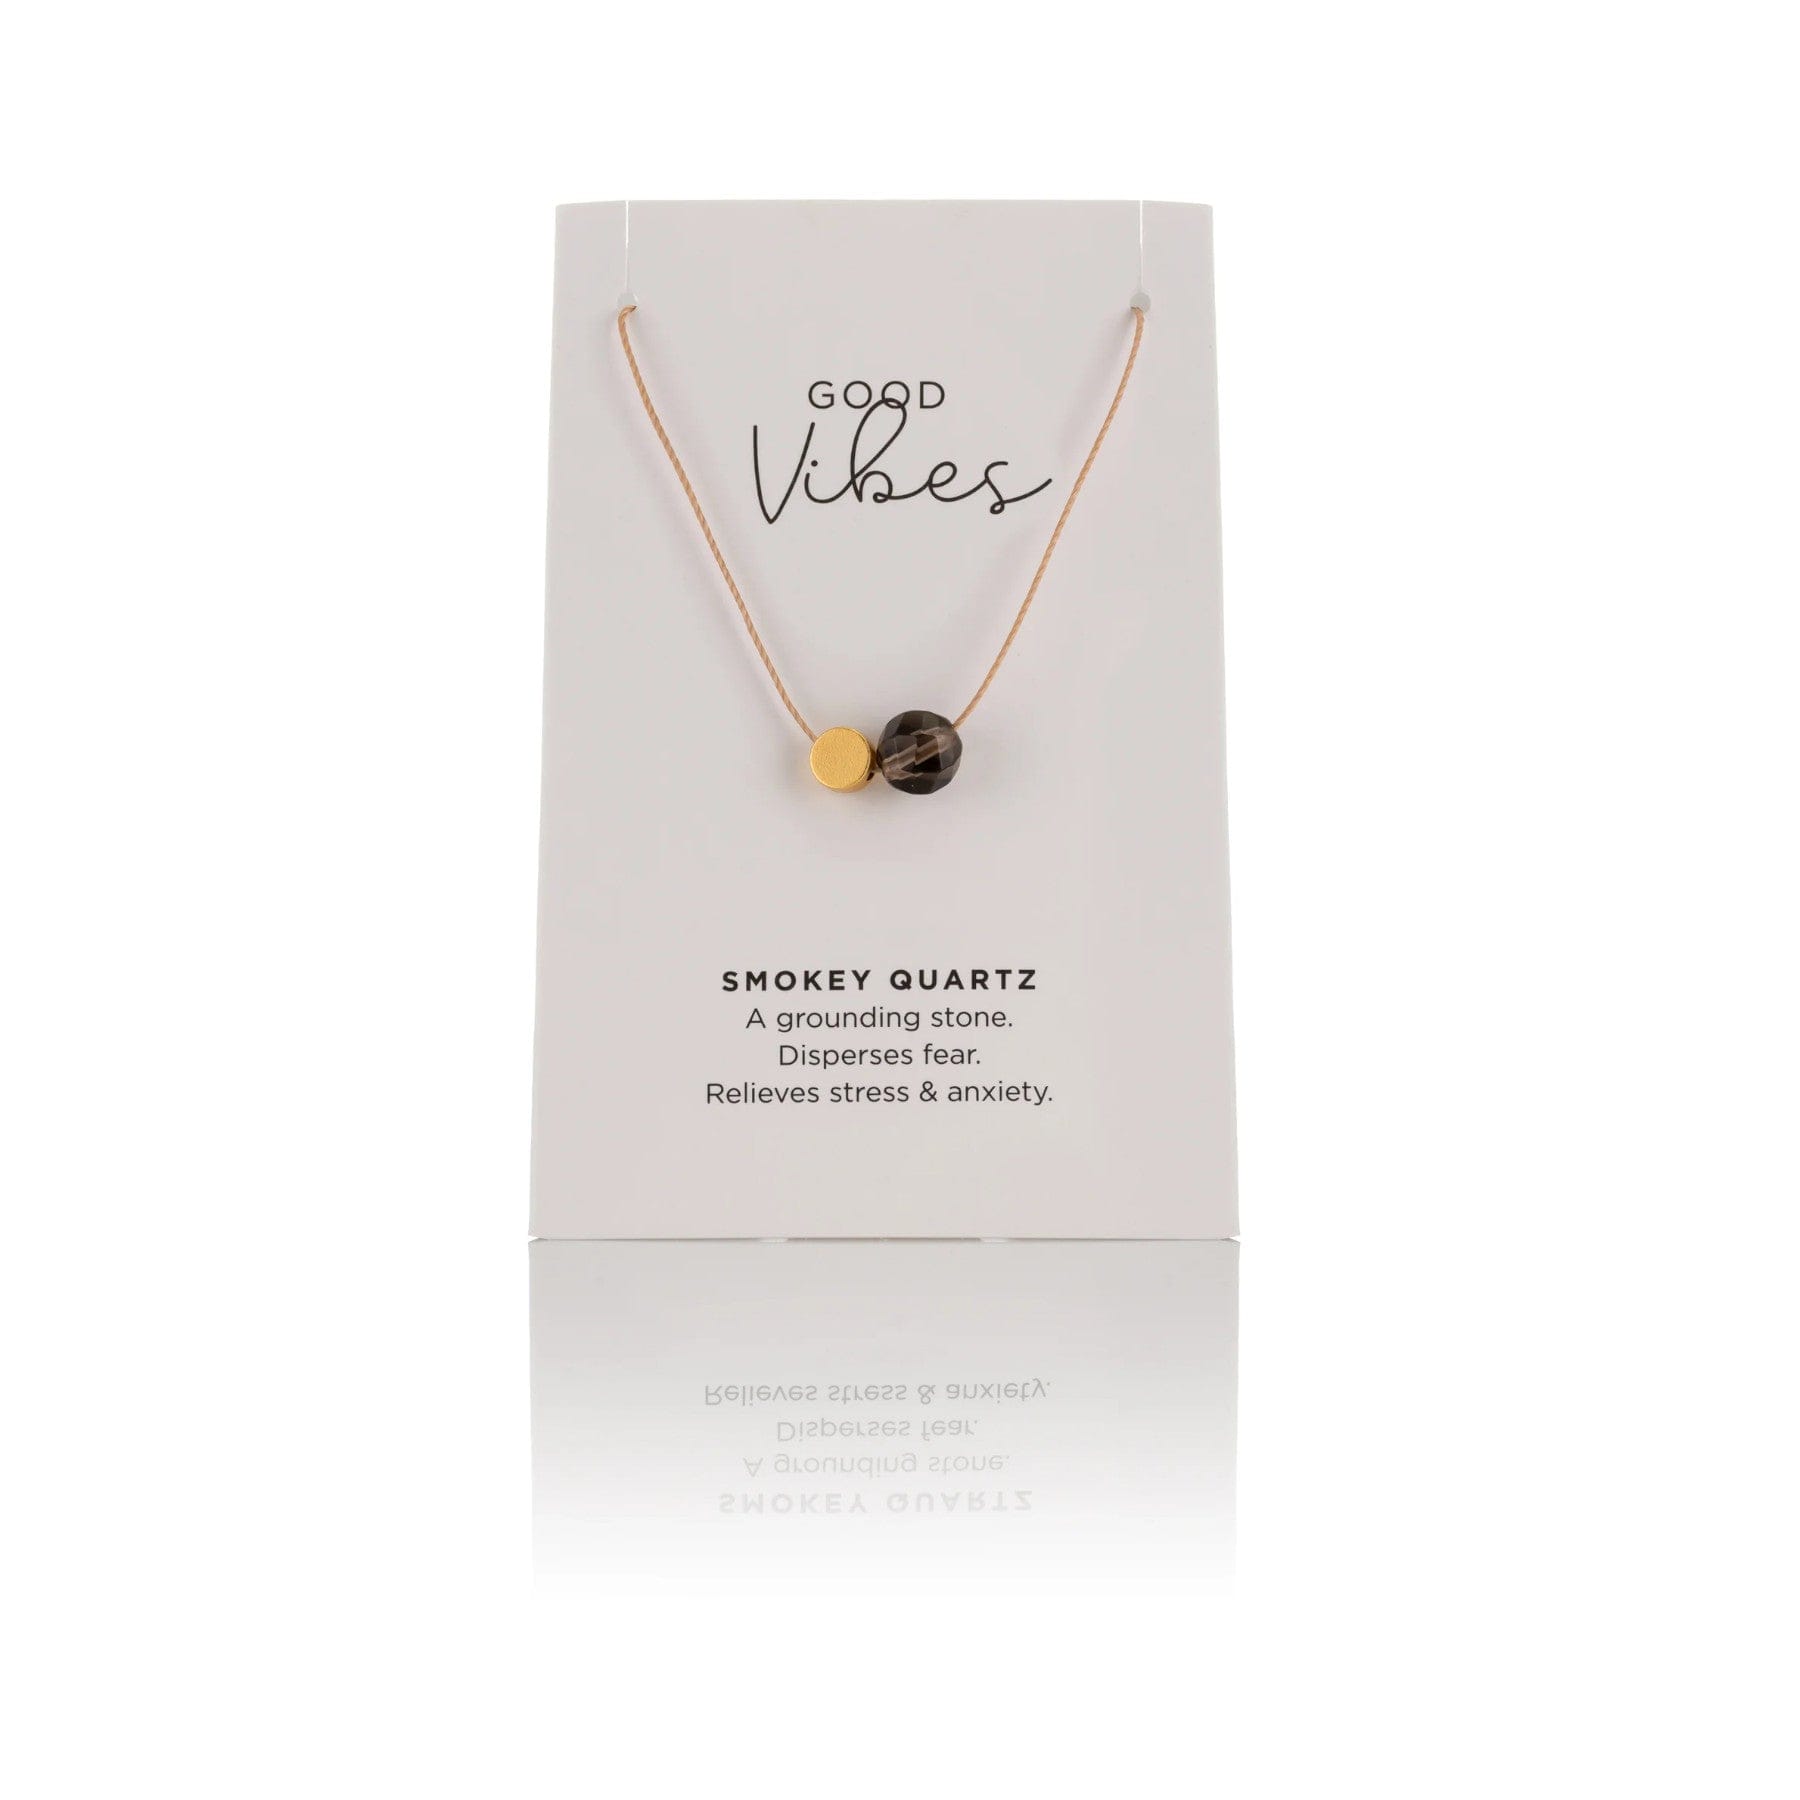 Smokey quartz necklace displayed on white packaging with "Good Vibes" text, description stating it is a grounding stone that disperses fear, relieves stress and anxiety.